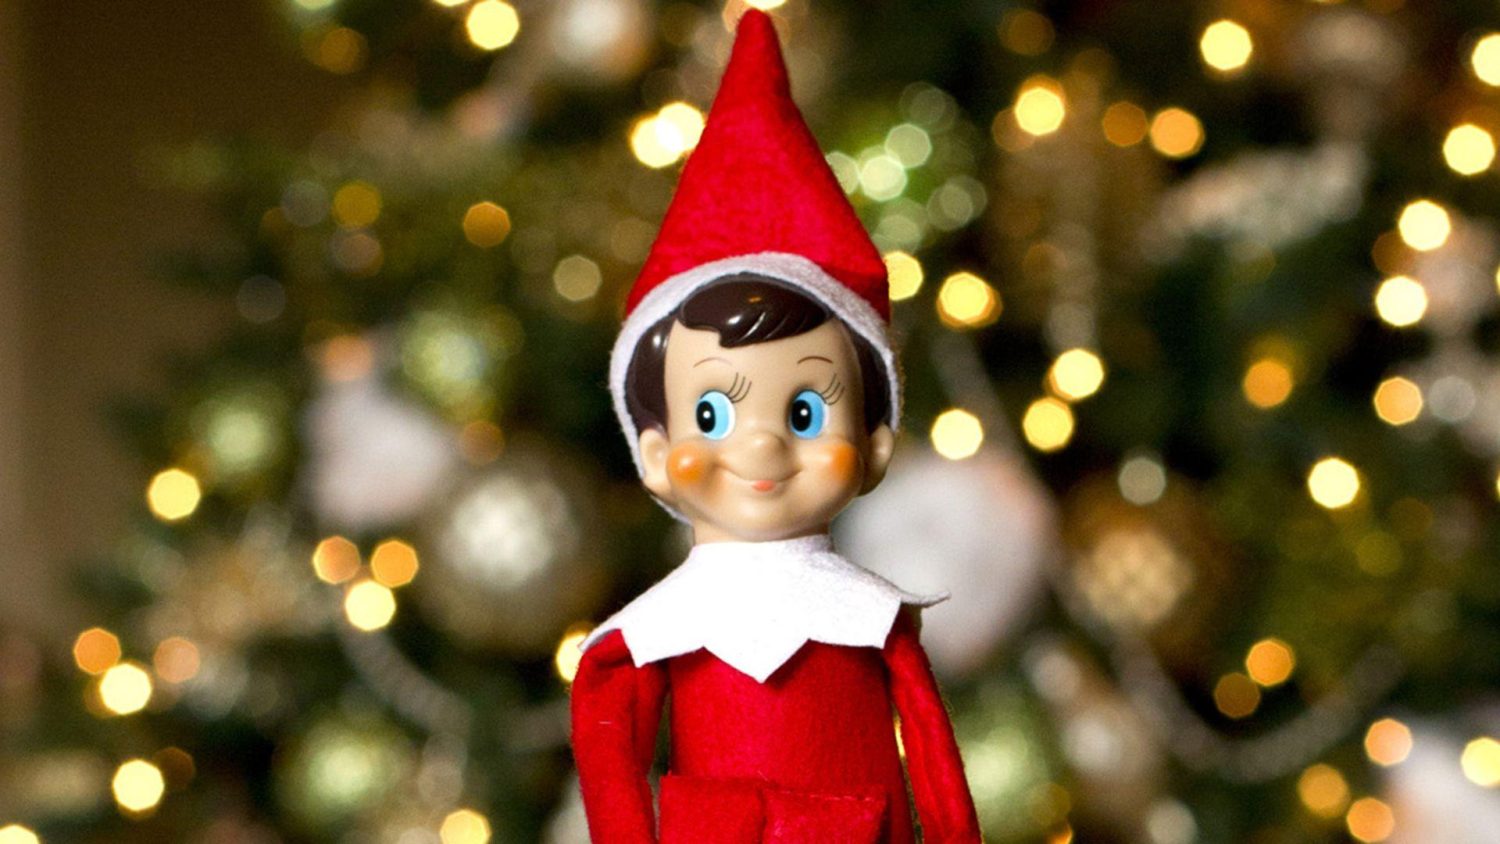 Festive Mom Accidentally Melts Elf On The Shelf In The Oven